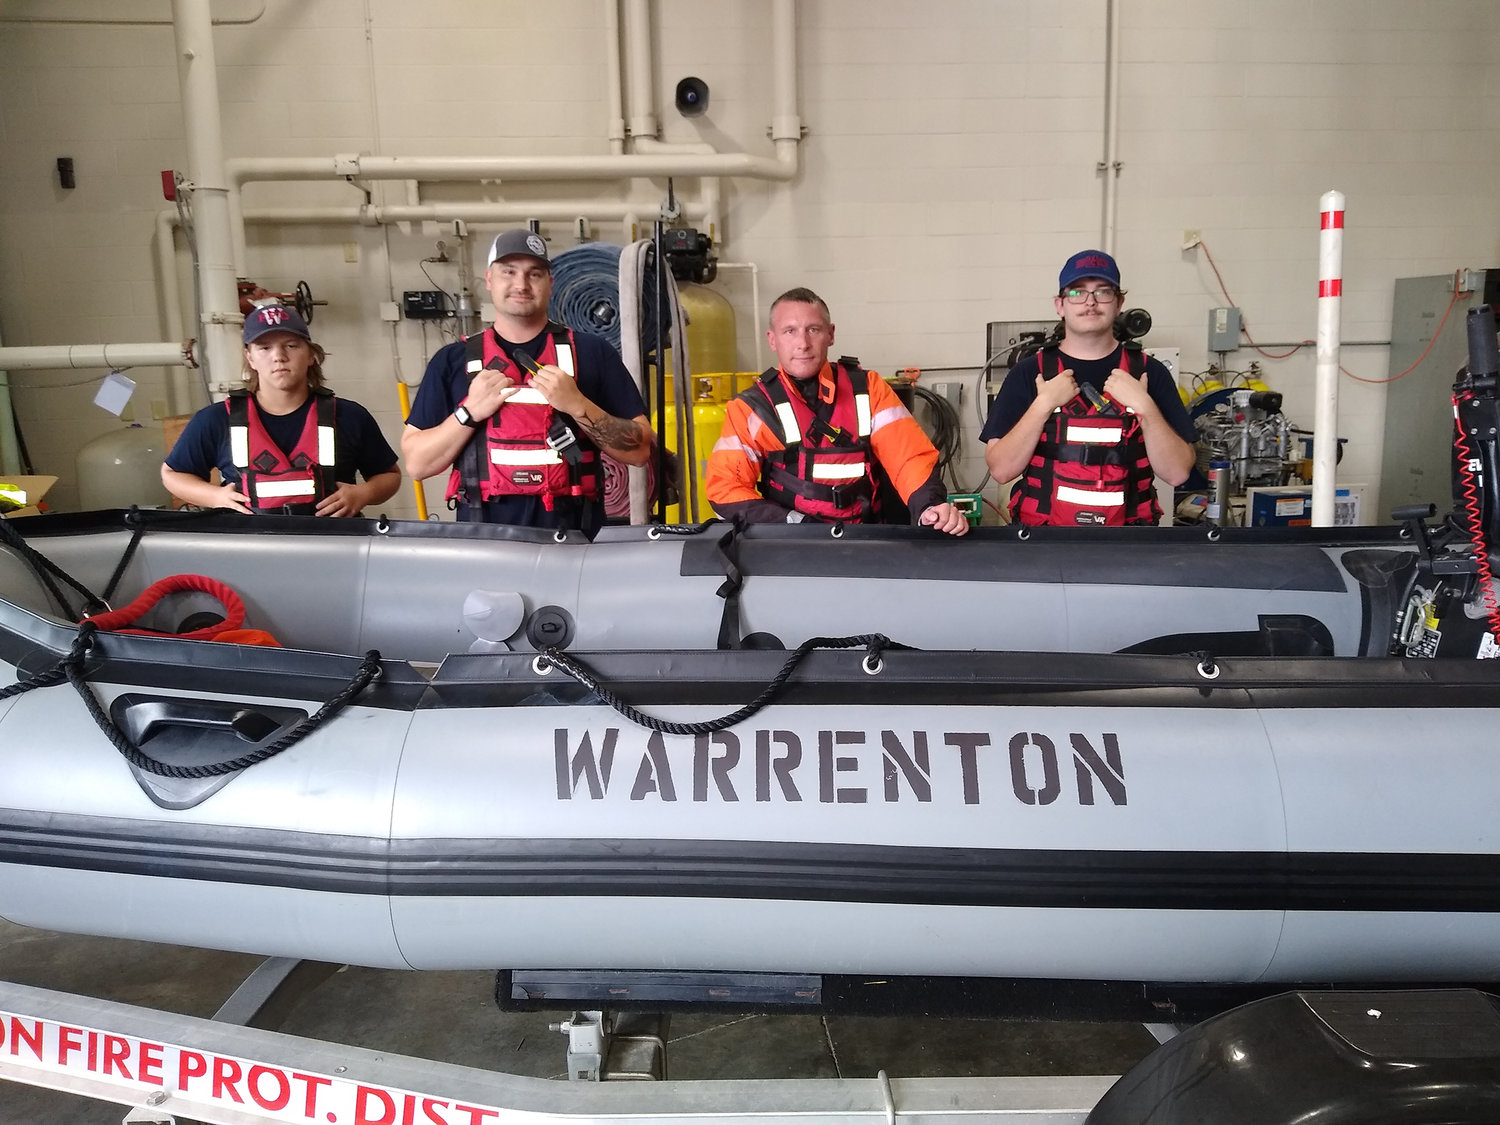 PREPARED FOR RESCUE — Warrenton firefighters demonstrate the life vests, suit and rigid inflatable boat that are involved in swiftwater rescues. Pictured, from left, are junior firefighter Ashton Dabbs, firefighter Justin Mosher, Capt. Matt Dabbs, and firefighter Nolan Patterson. Capt. Dabbs and Mosher were on the boat during last week’s rescue, along with Chief Arron Lee of Winfield-Foley Fire District.